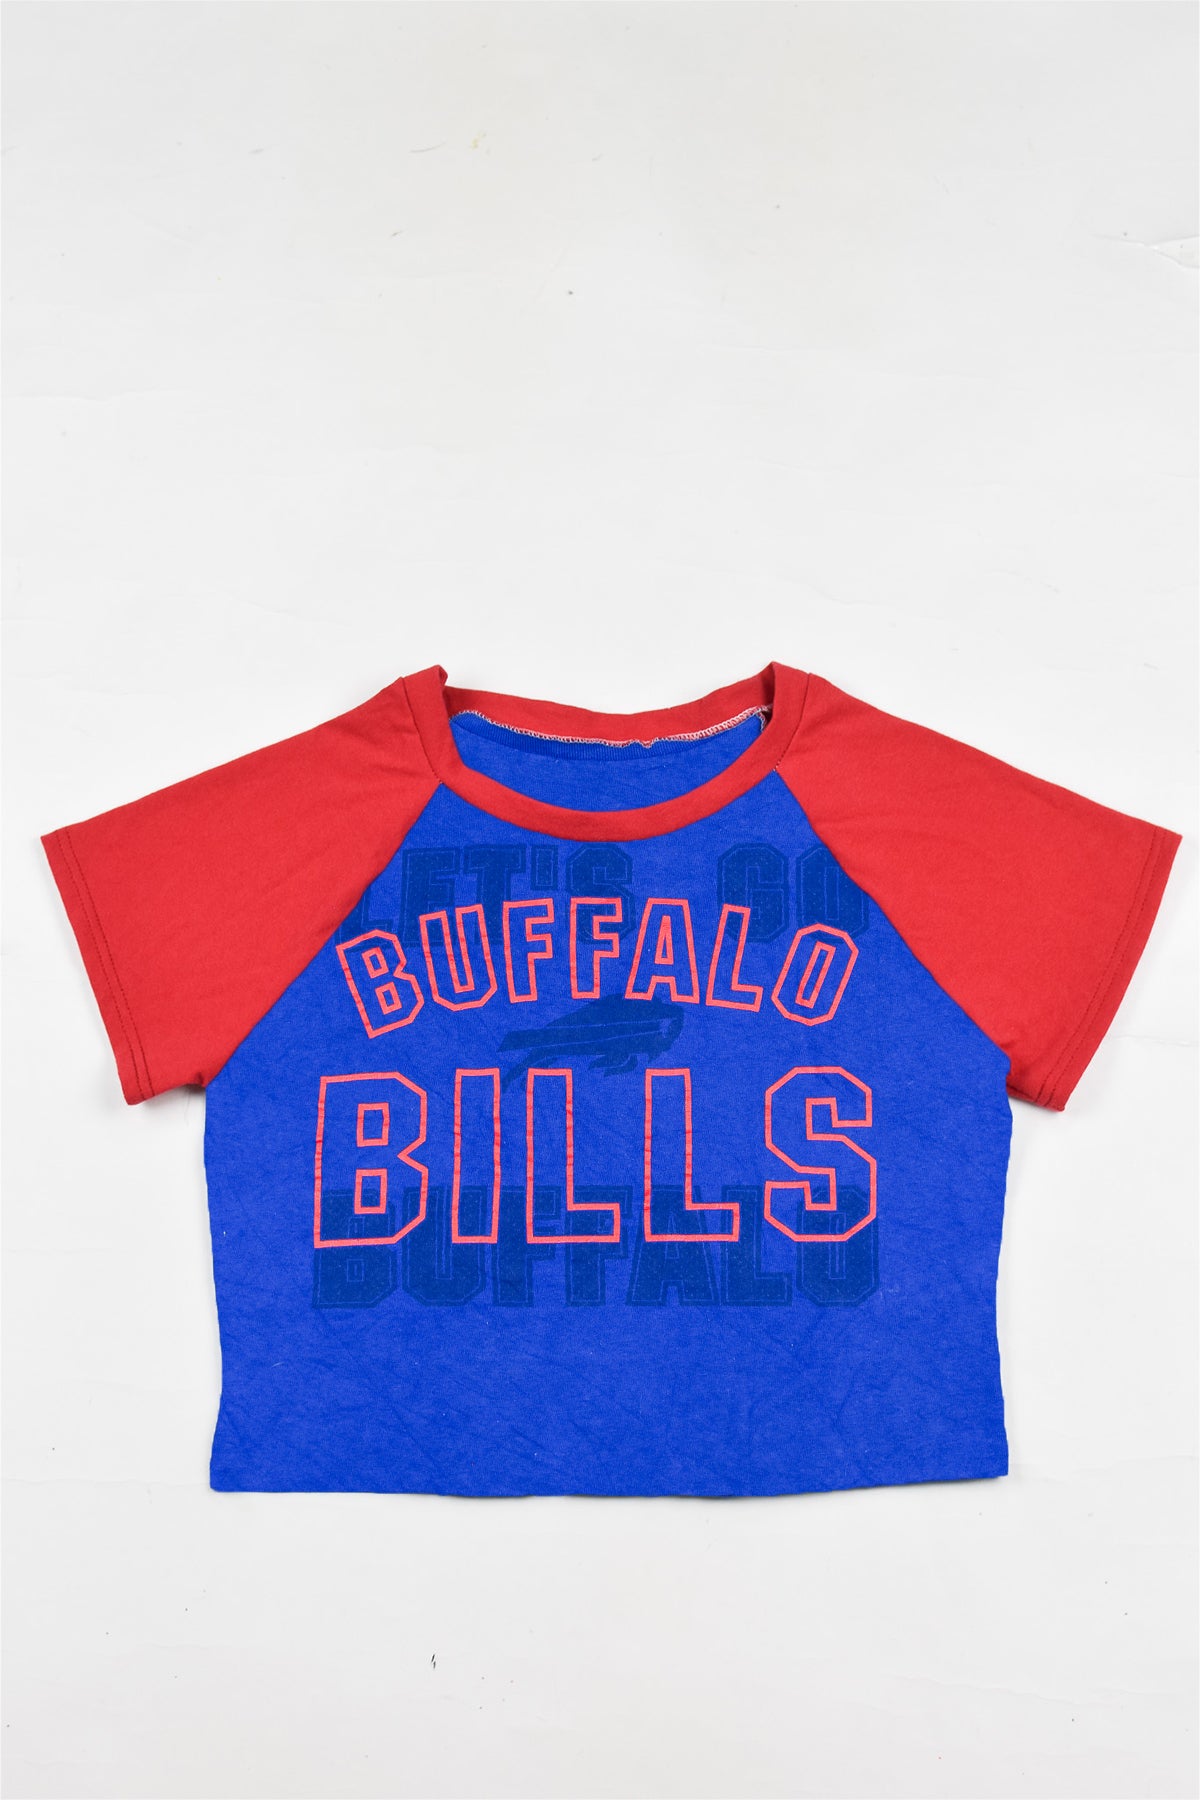 Upcycled Blue Jays Baby Tee - Tonguetied Apparel